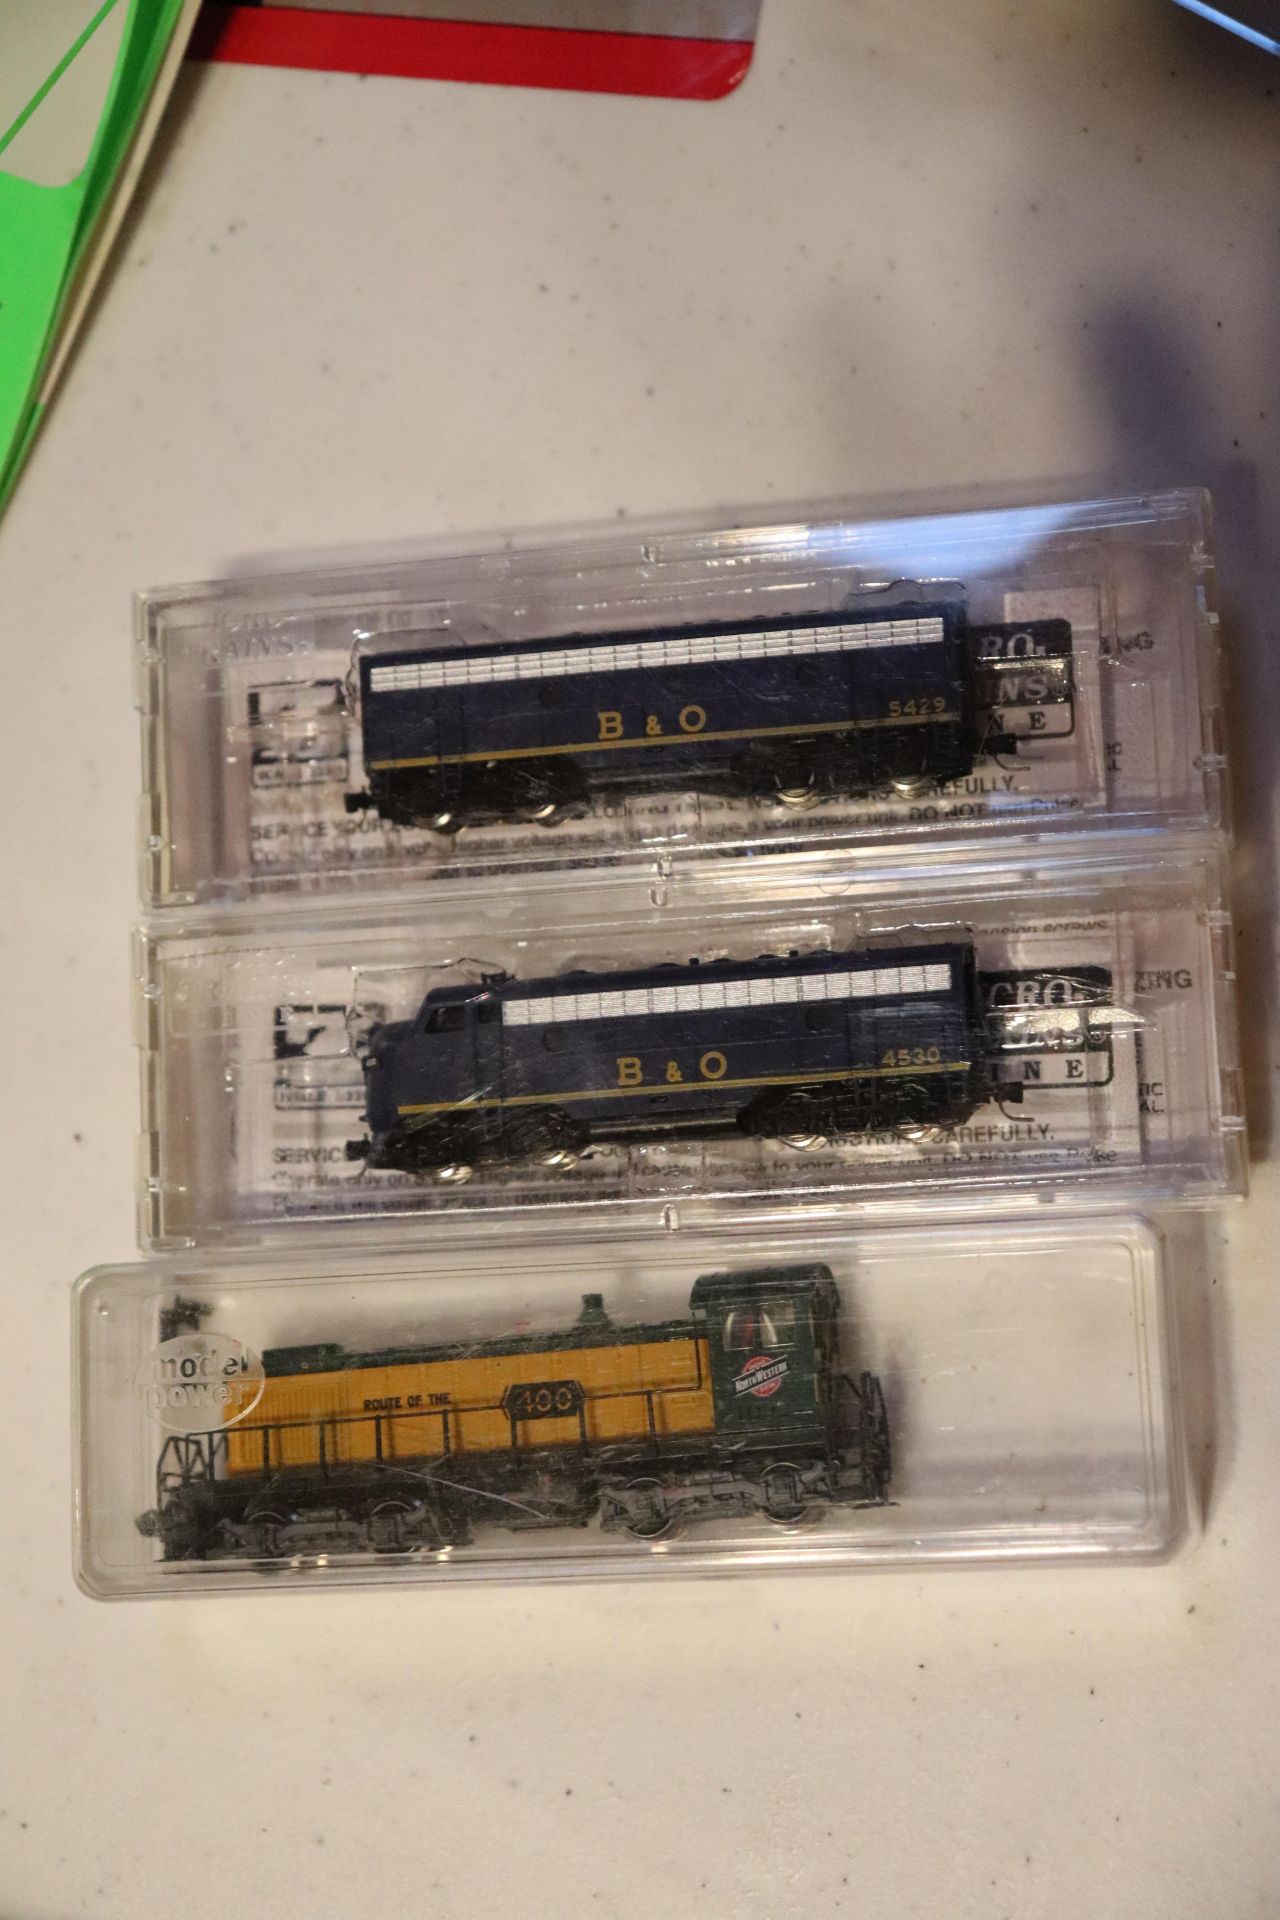 Micro-Trains Baltimore and Ohio Power A Unit locomotive and Micro-Trains Baltimore and Ohio Power B